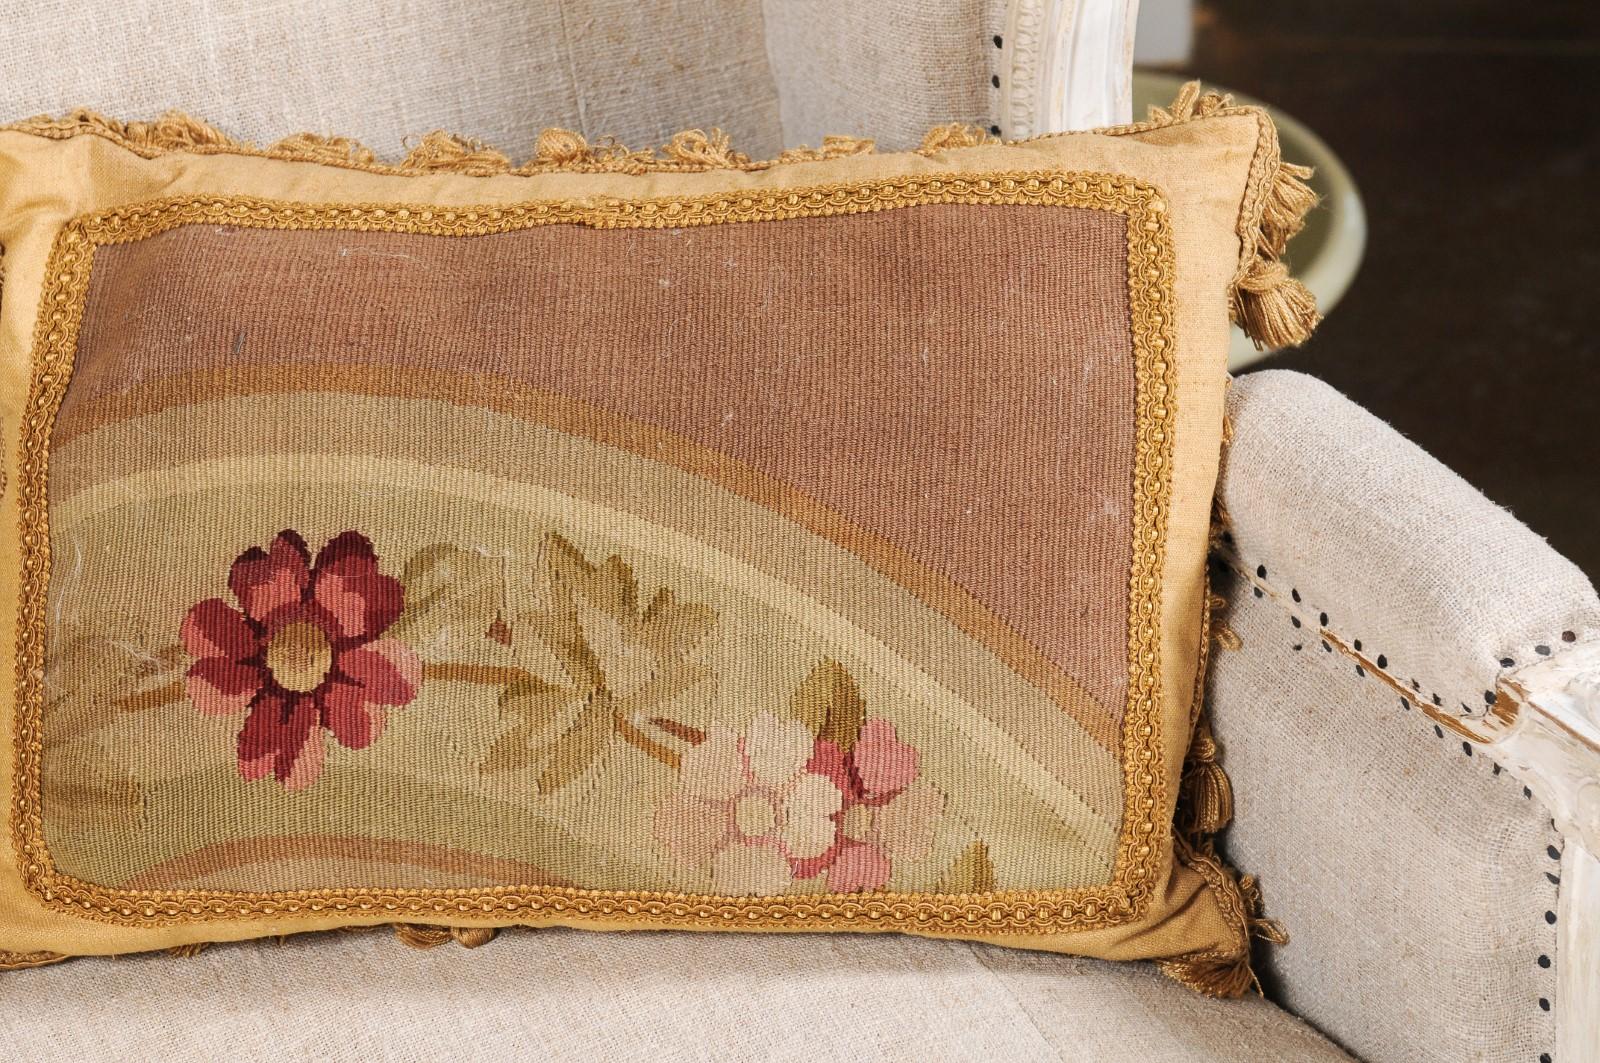 Pair of French 19th Century Aubusson Tapestry Pillows with Flowers and Tassels For Sale 2